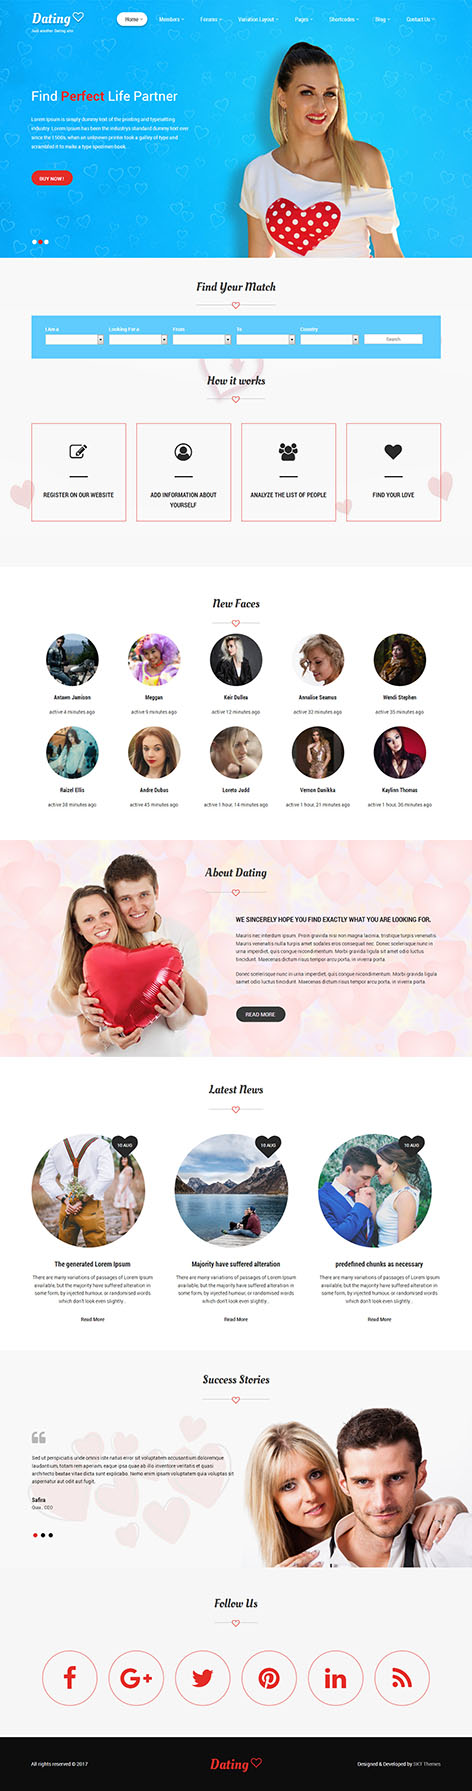 dating screen 1 - Dating